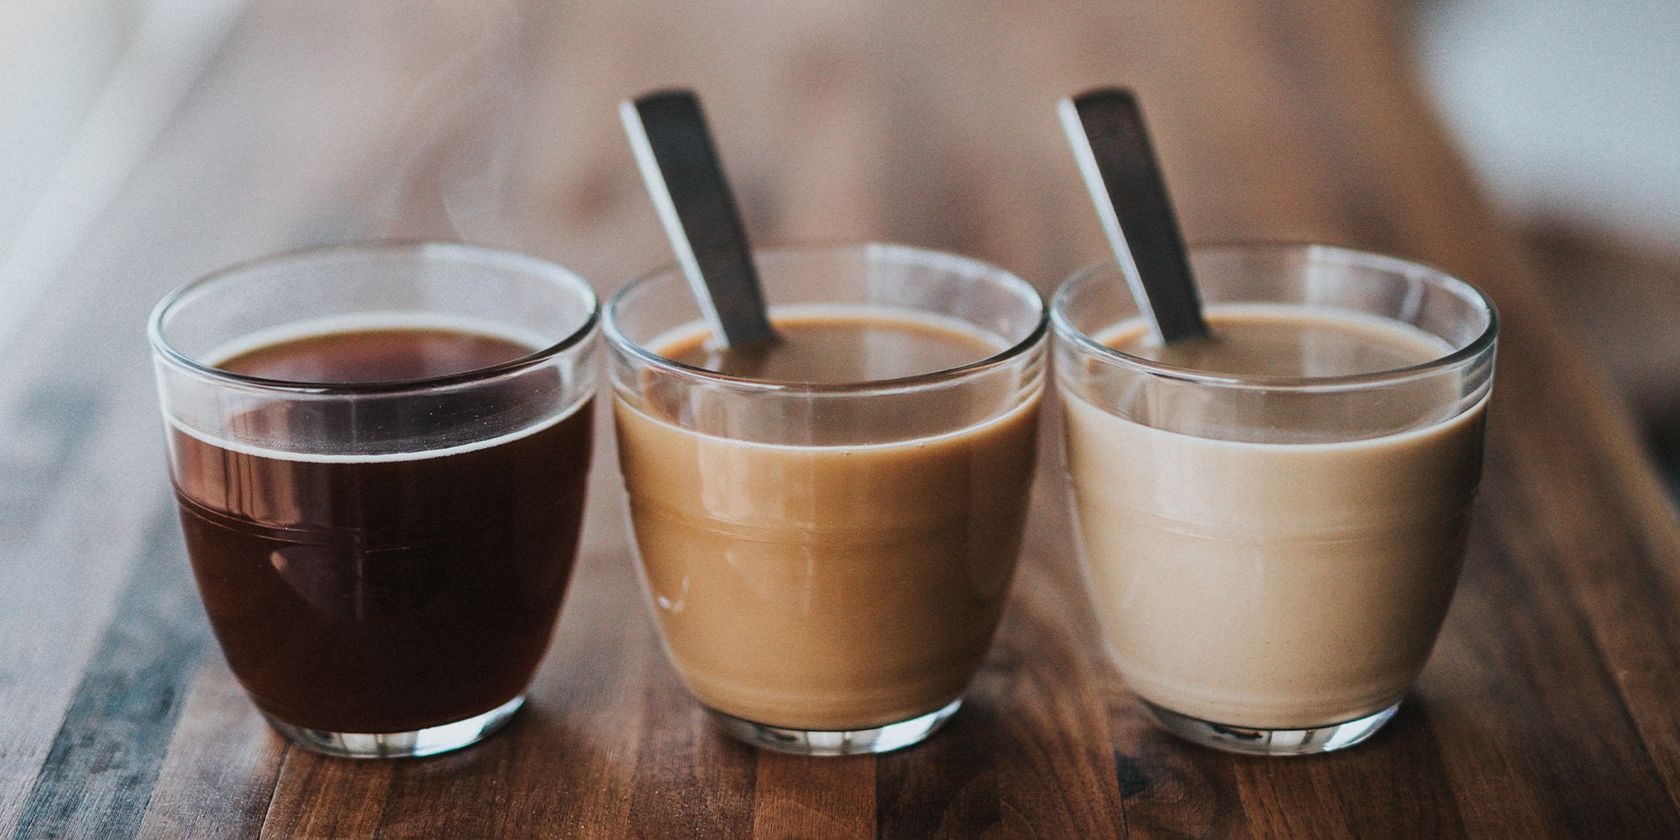 Three espressos lined up on a wood table.